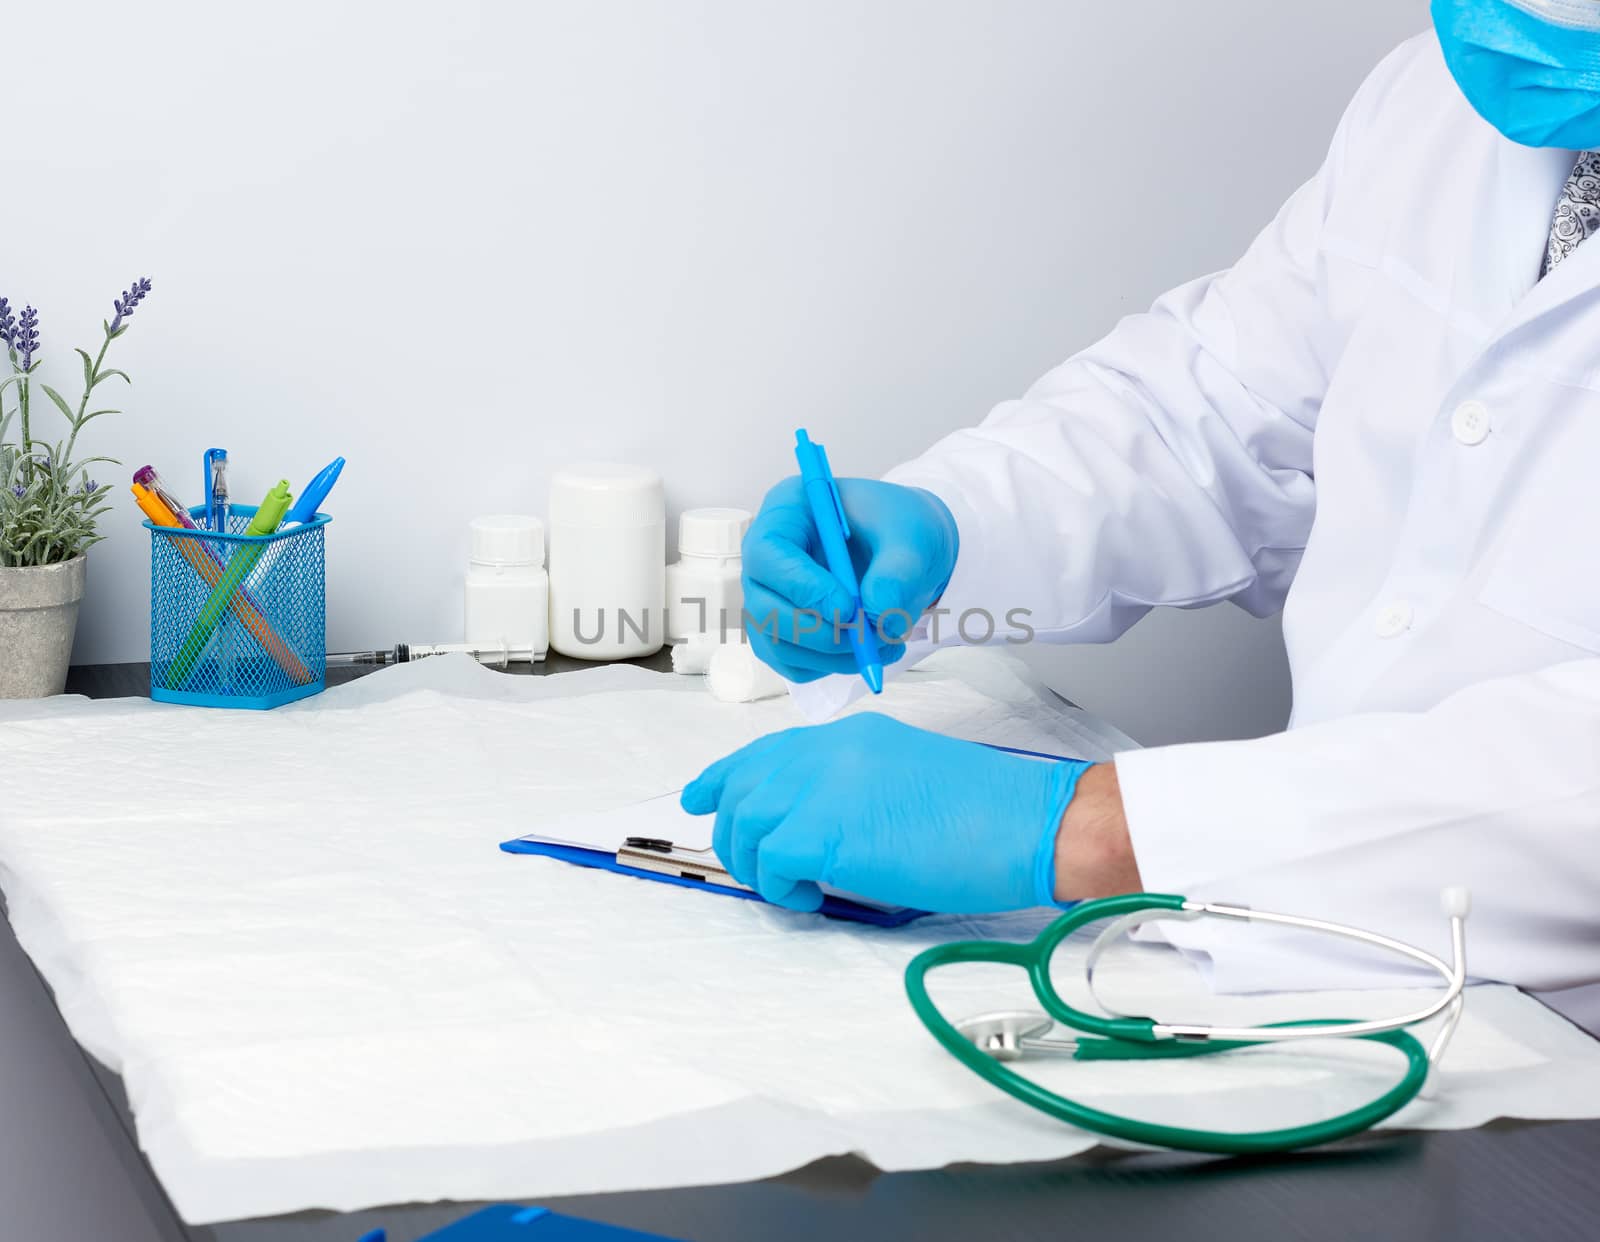 doctor in a white medical coat sits at a table and writes with a pen on a white sheet of paper,  concept of patient admissions